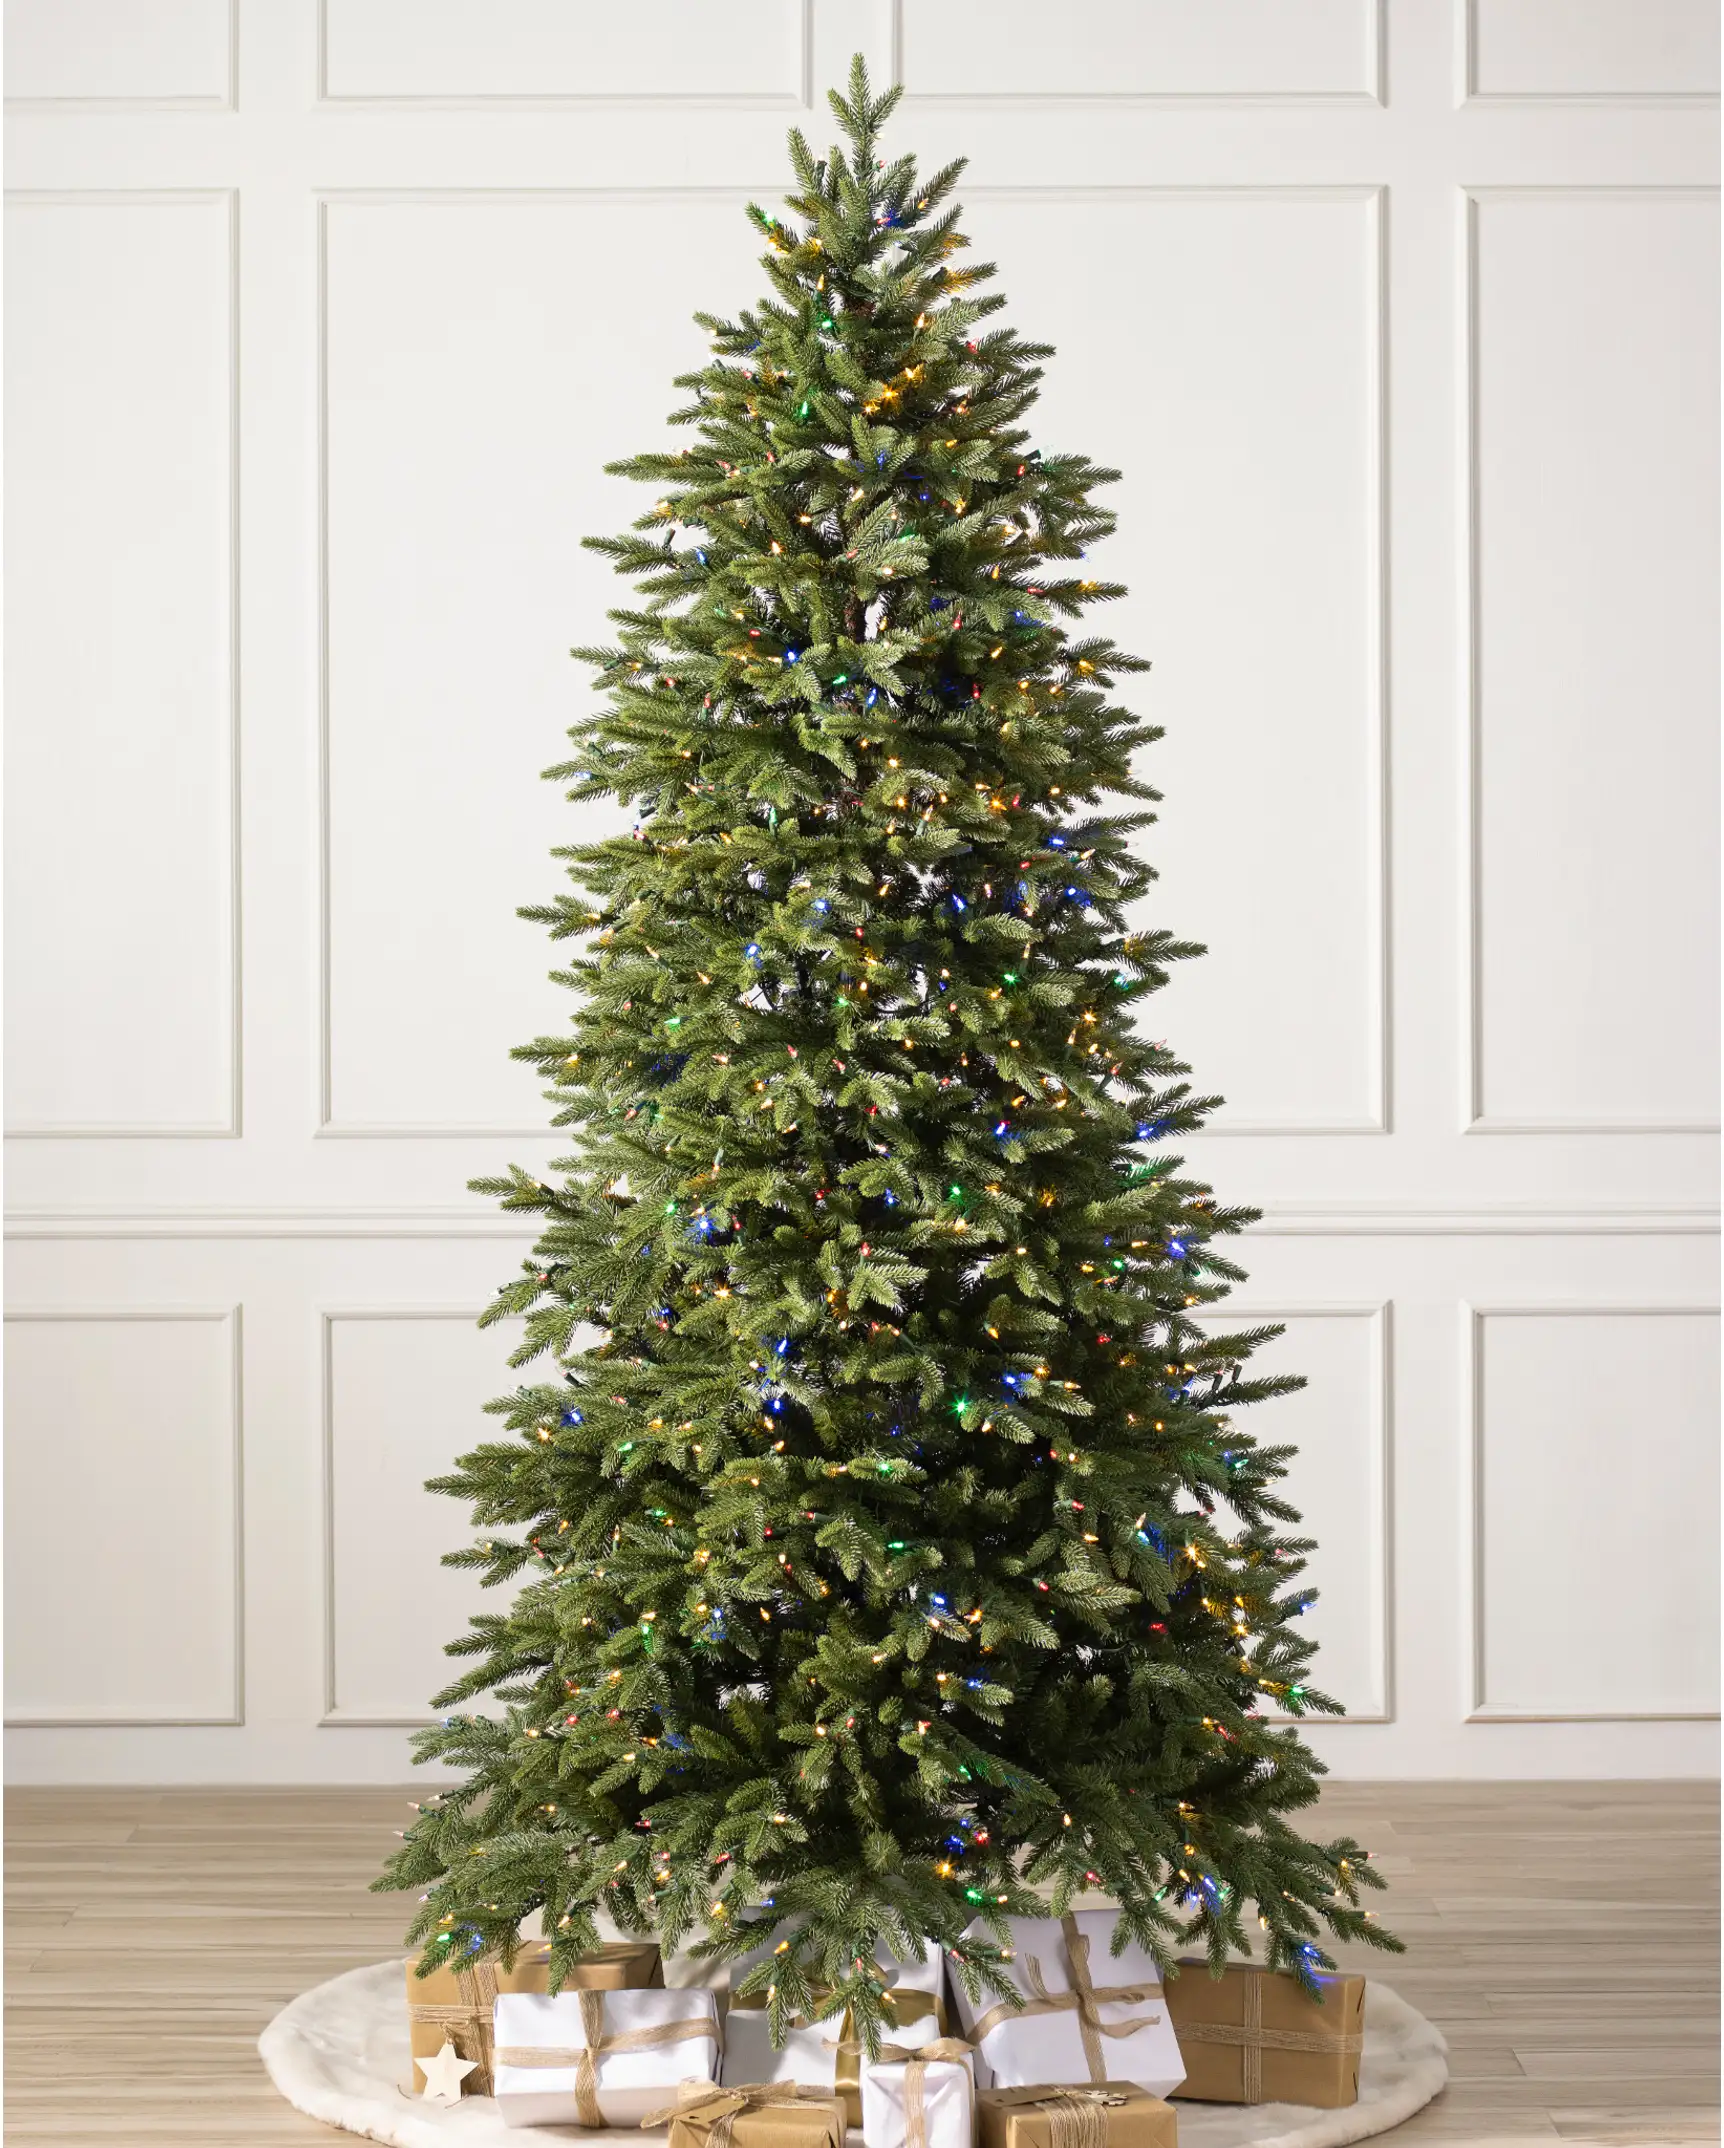 Where To Buy Artificial Christmas Tree?